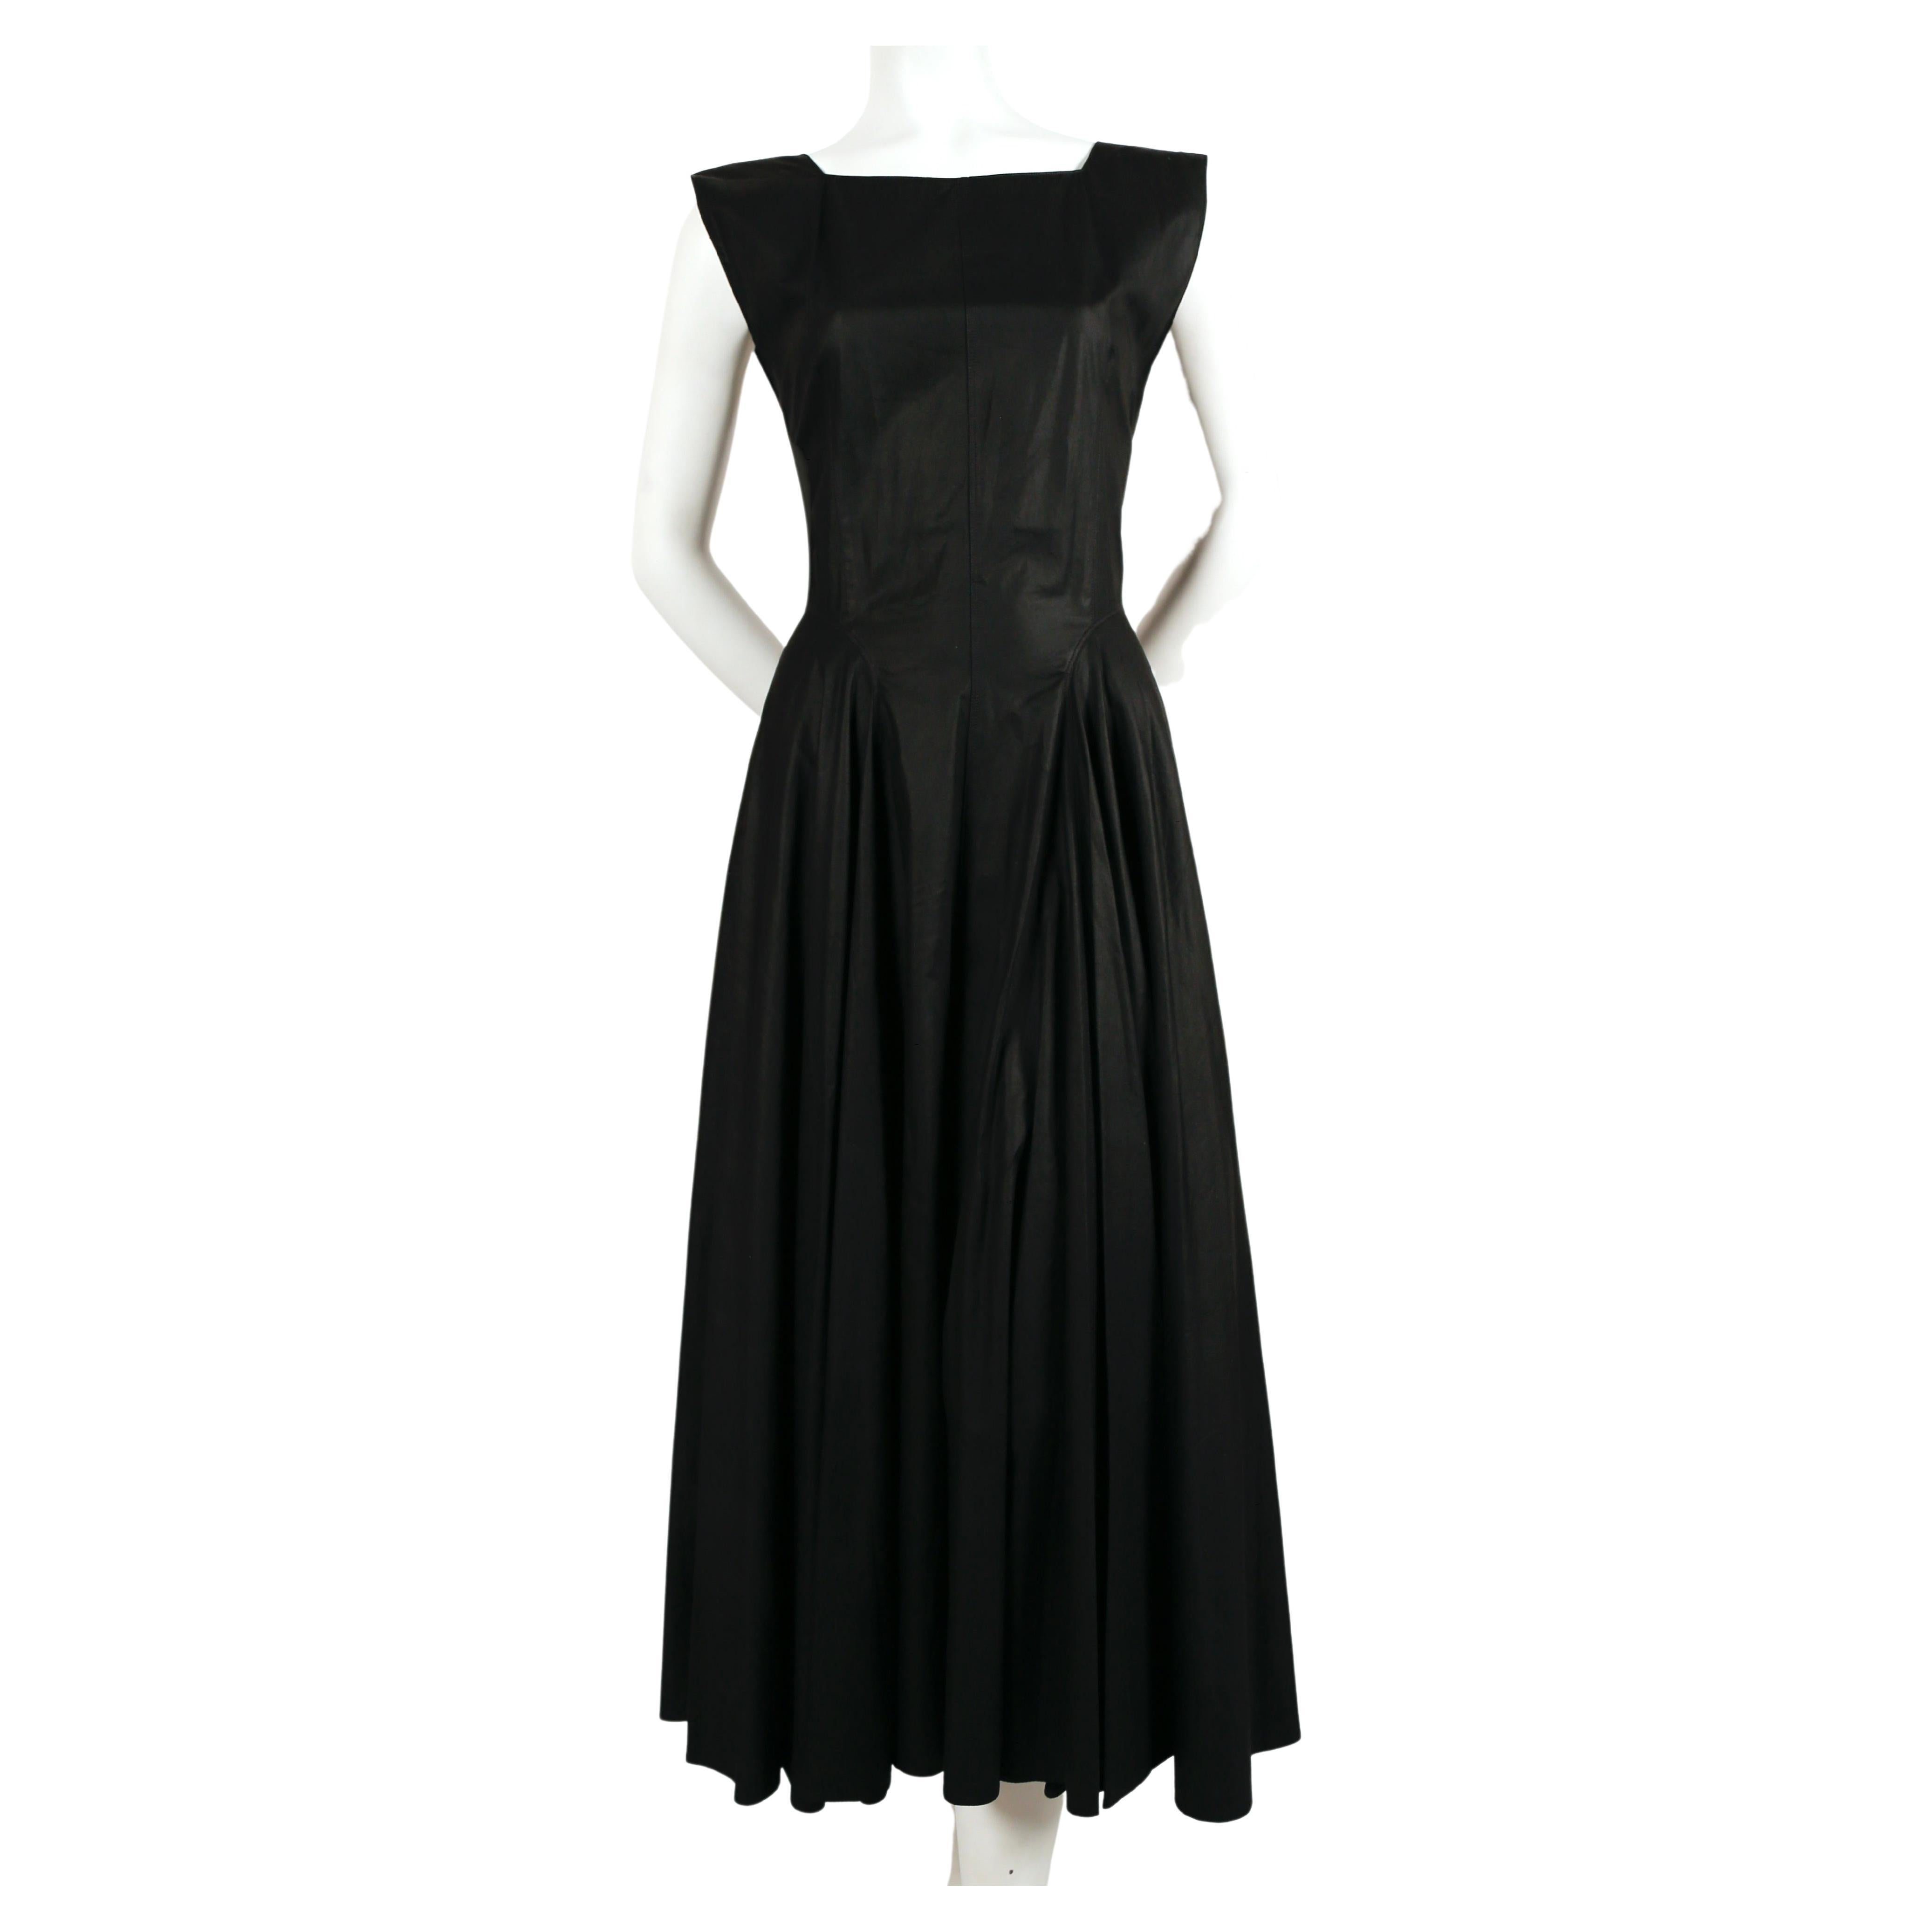 Black cotton dress with amazing seams and full skirt designed by Azzedine Alaia dating to the 1980's. Labeled a French size 40 however this dress runs very small. Dress best fit a modern day French 36. Approximate measurements: bust 32